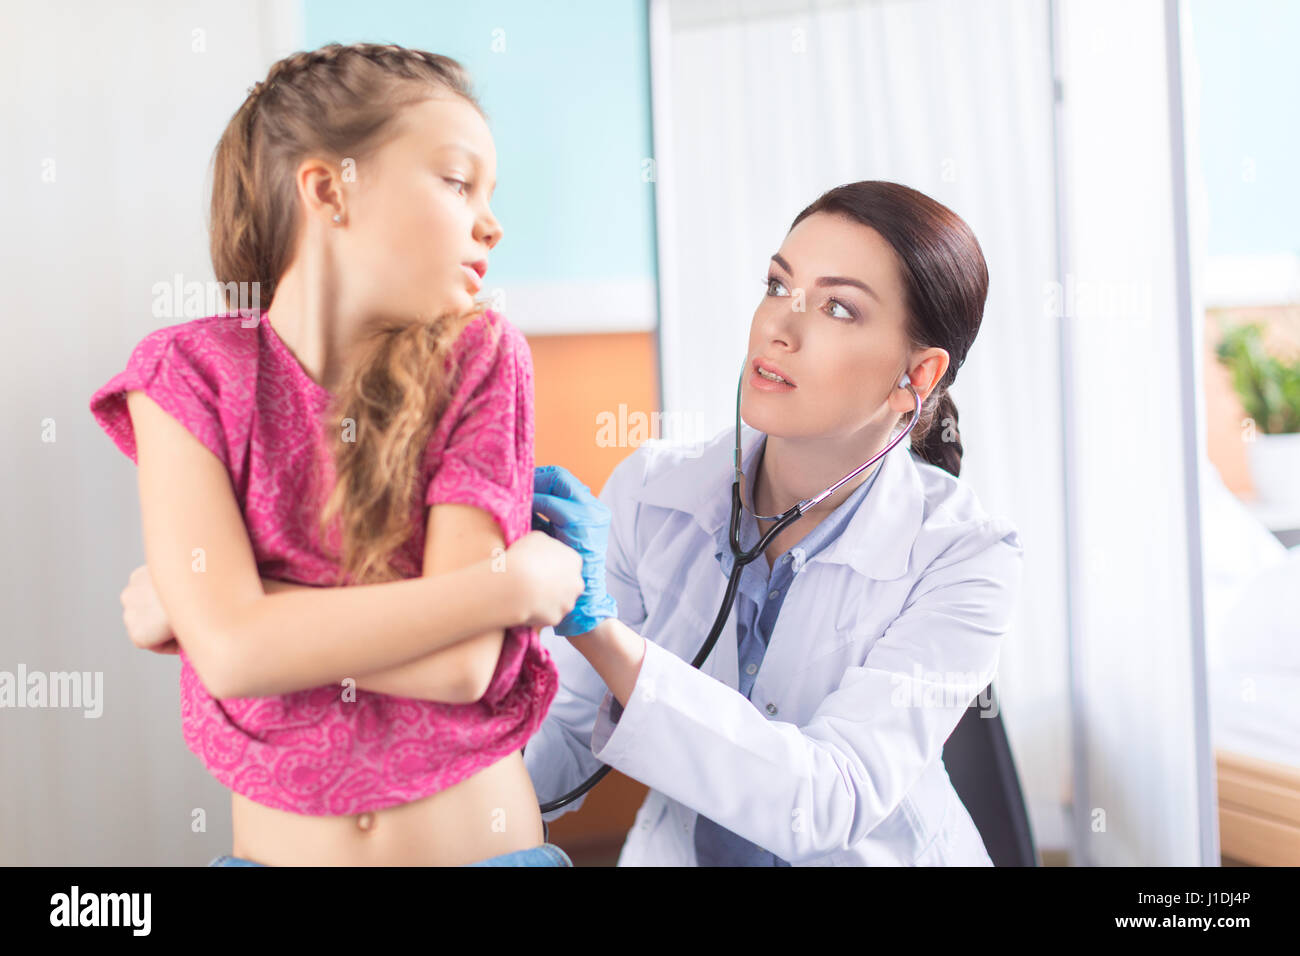 Young woman doctor with stethoscope listening to heartbeat and lungs of  little girl patient Stock Photo - Alamy